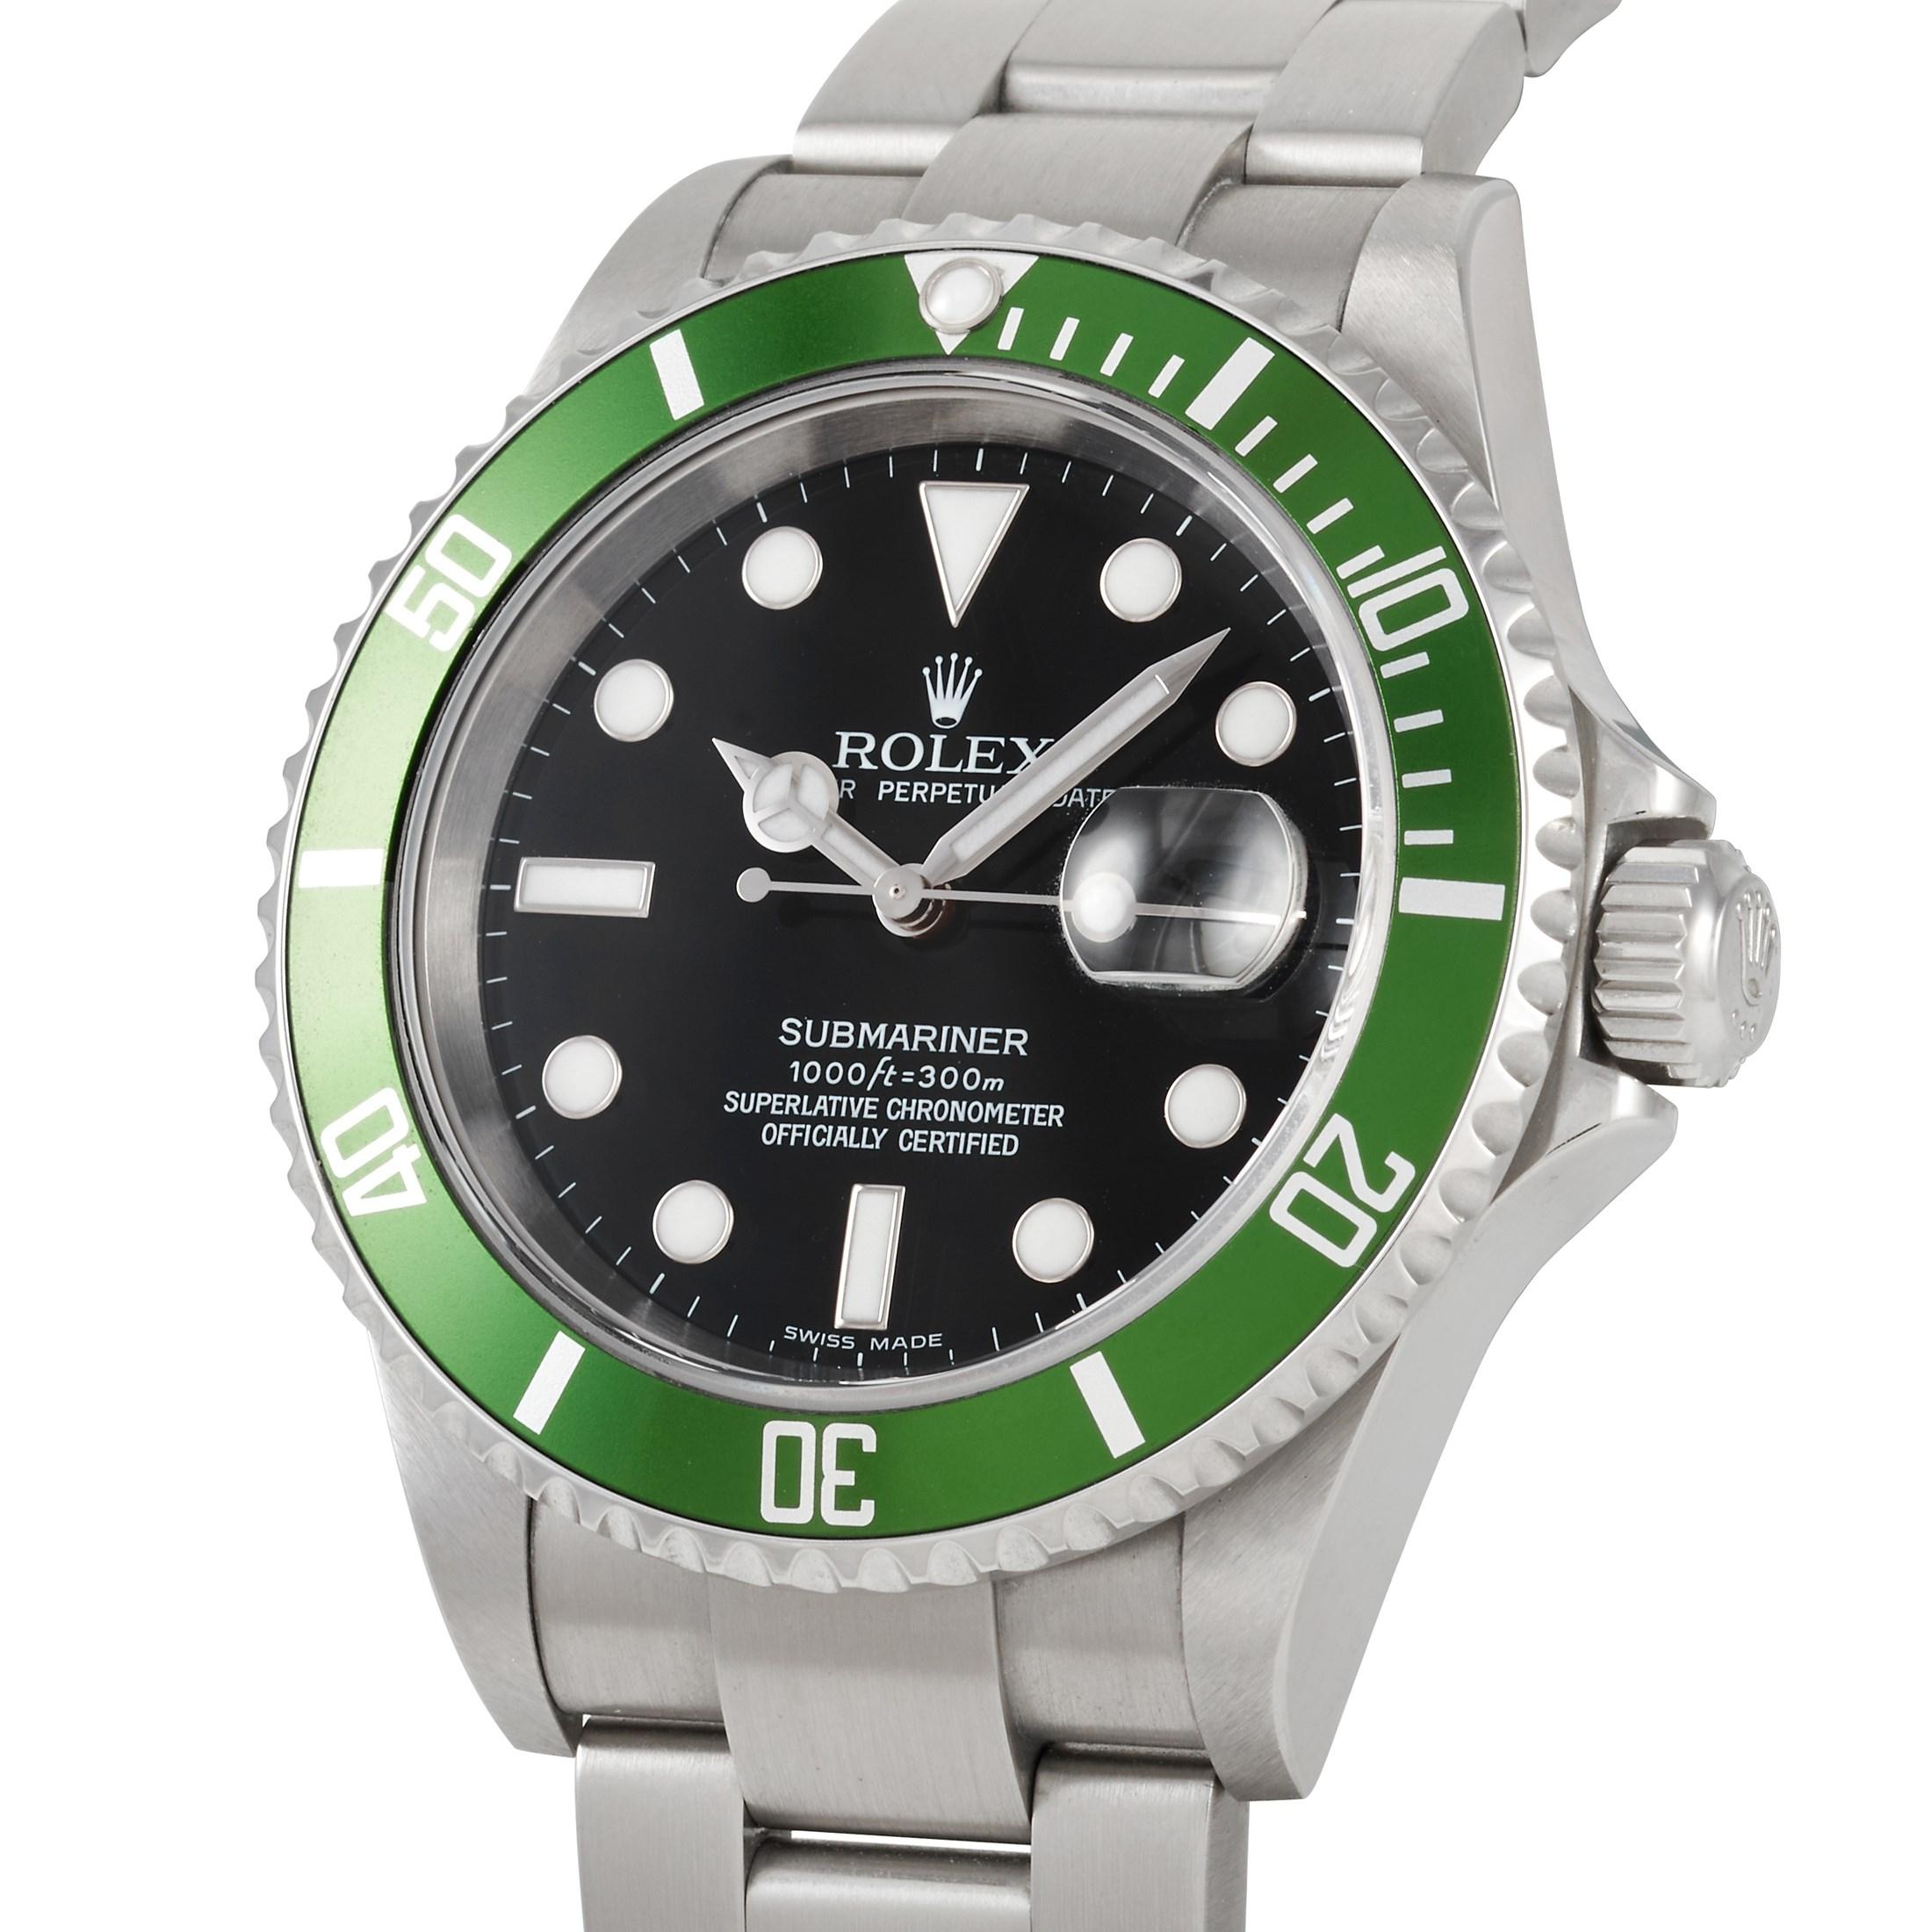 The Rolex Submariner Date - also known as the Kermit, reference number 16610LV, was launched in 2003 in celebration of the 50th anniversary of the Rolex Submariner.

The watch is presented with a stainless steel Oyster case that measures 40 mm in